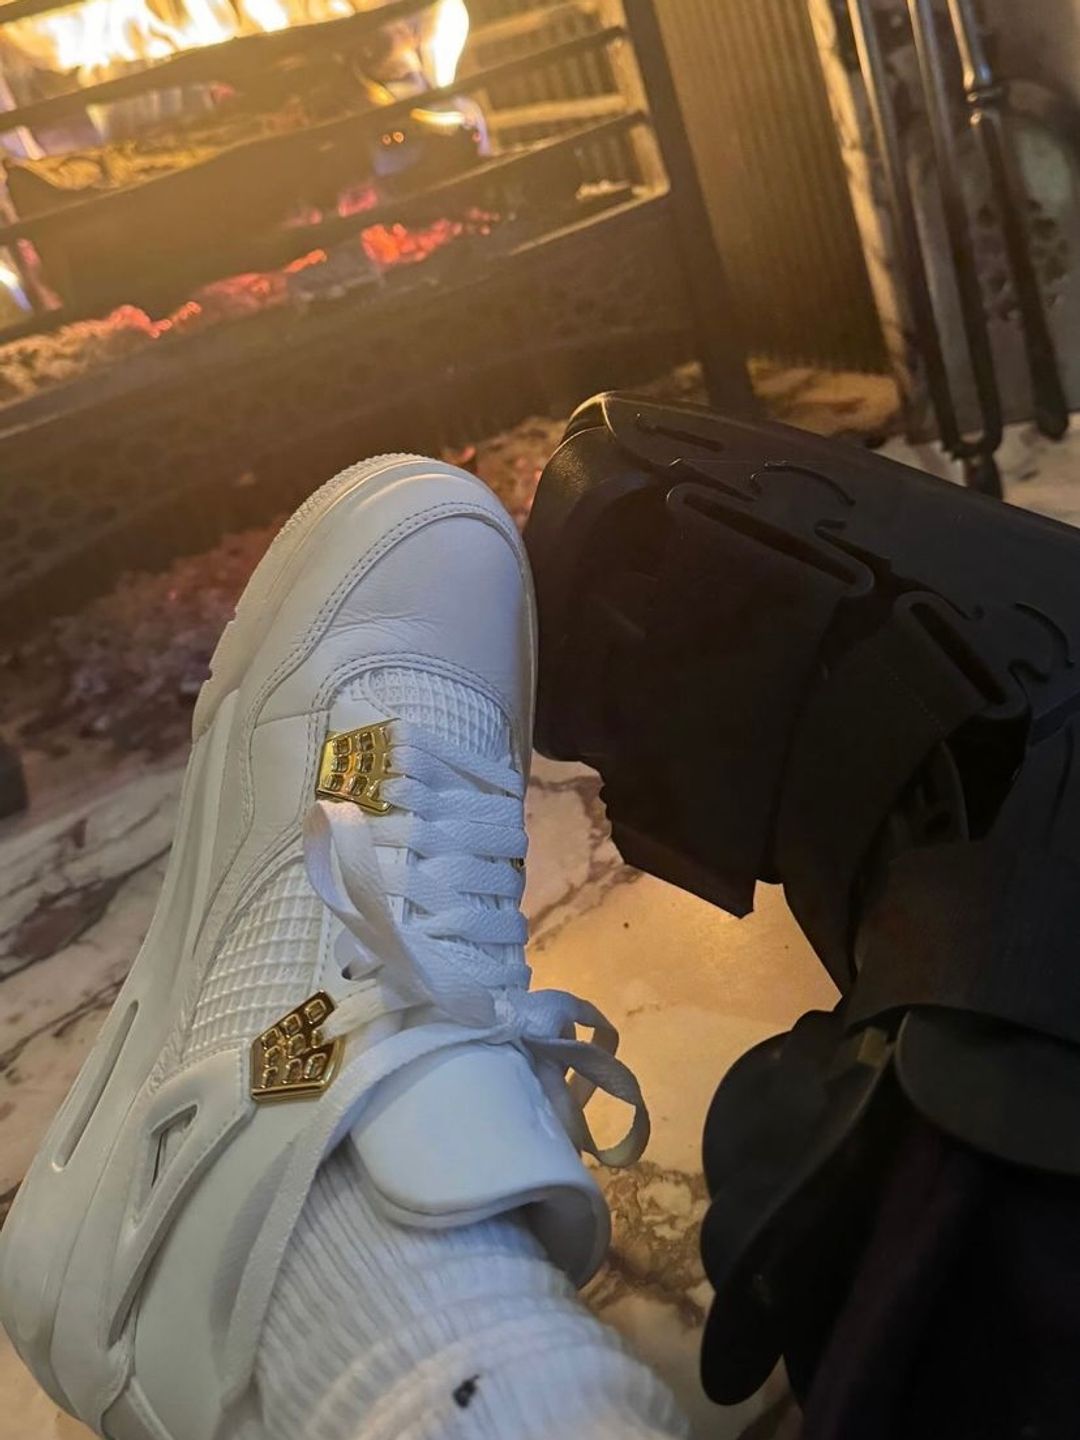 Nike Air Jordan 4 Retro Trainer alongside medical boot in front of a fireplace 